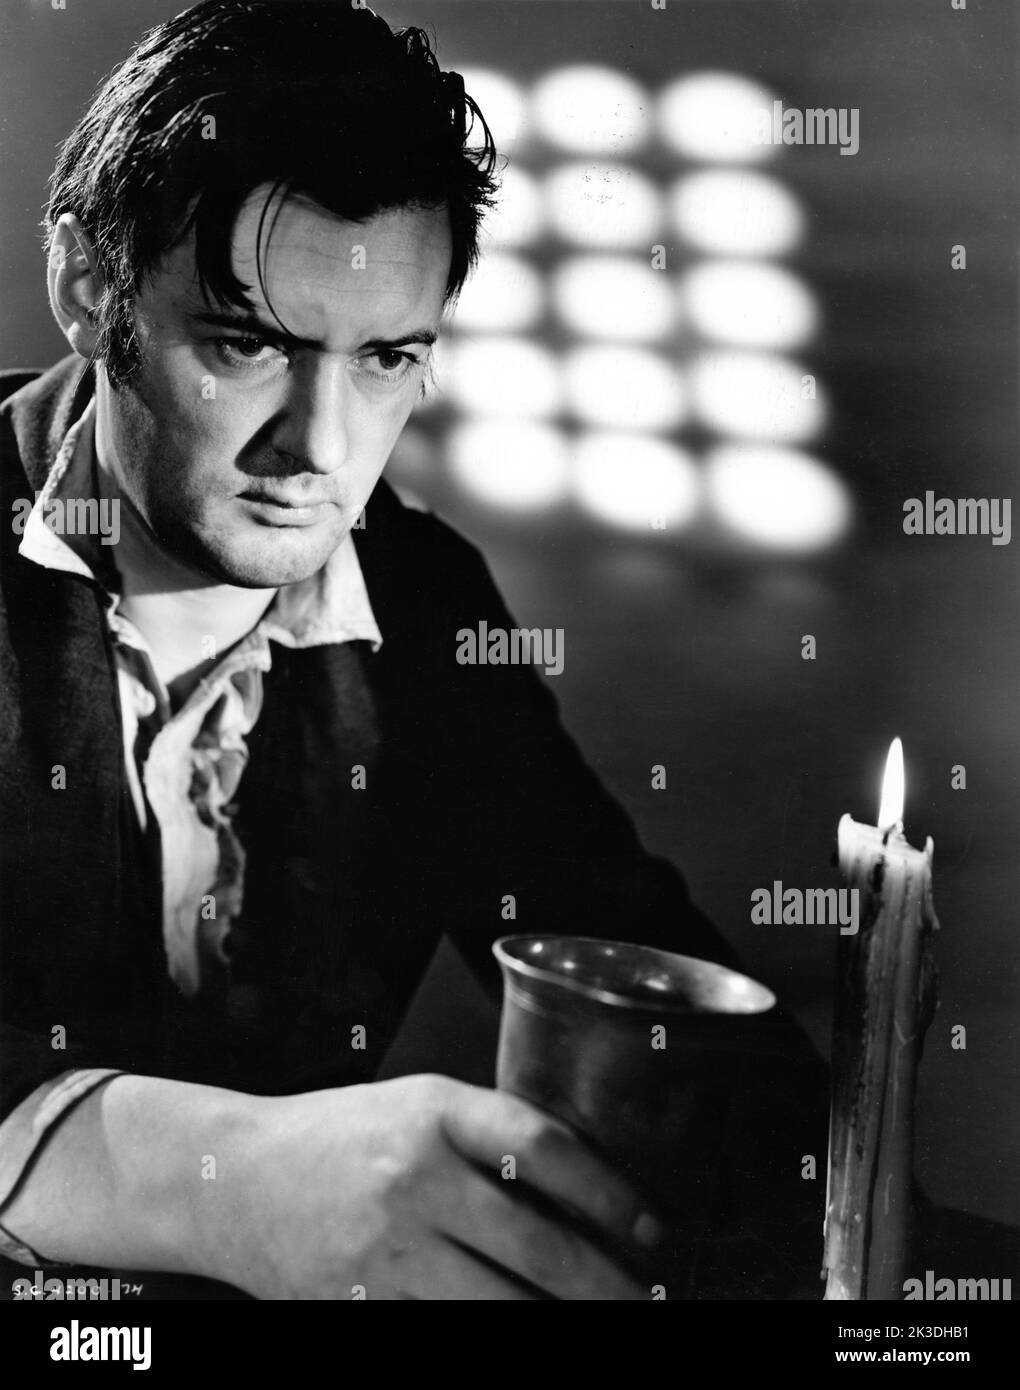 HUGH WILLIAMS Ritratto come Hindley in WUTHERING HEIGHTS 1939 regista WILLIAM WYLER sceneggiatura ben Hecht e Charles MacArthur romanzo Emily Bronte The Samuel Goldwyn Company / United Artists Foto Stock